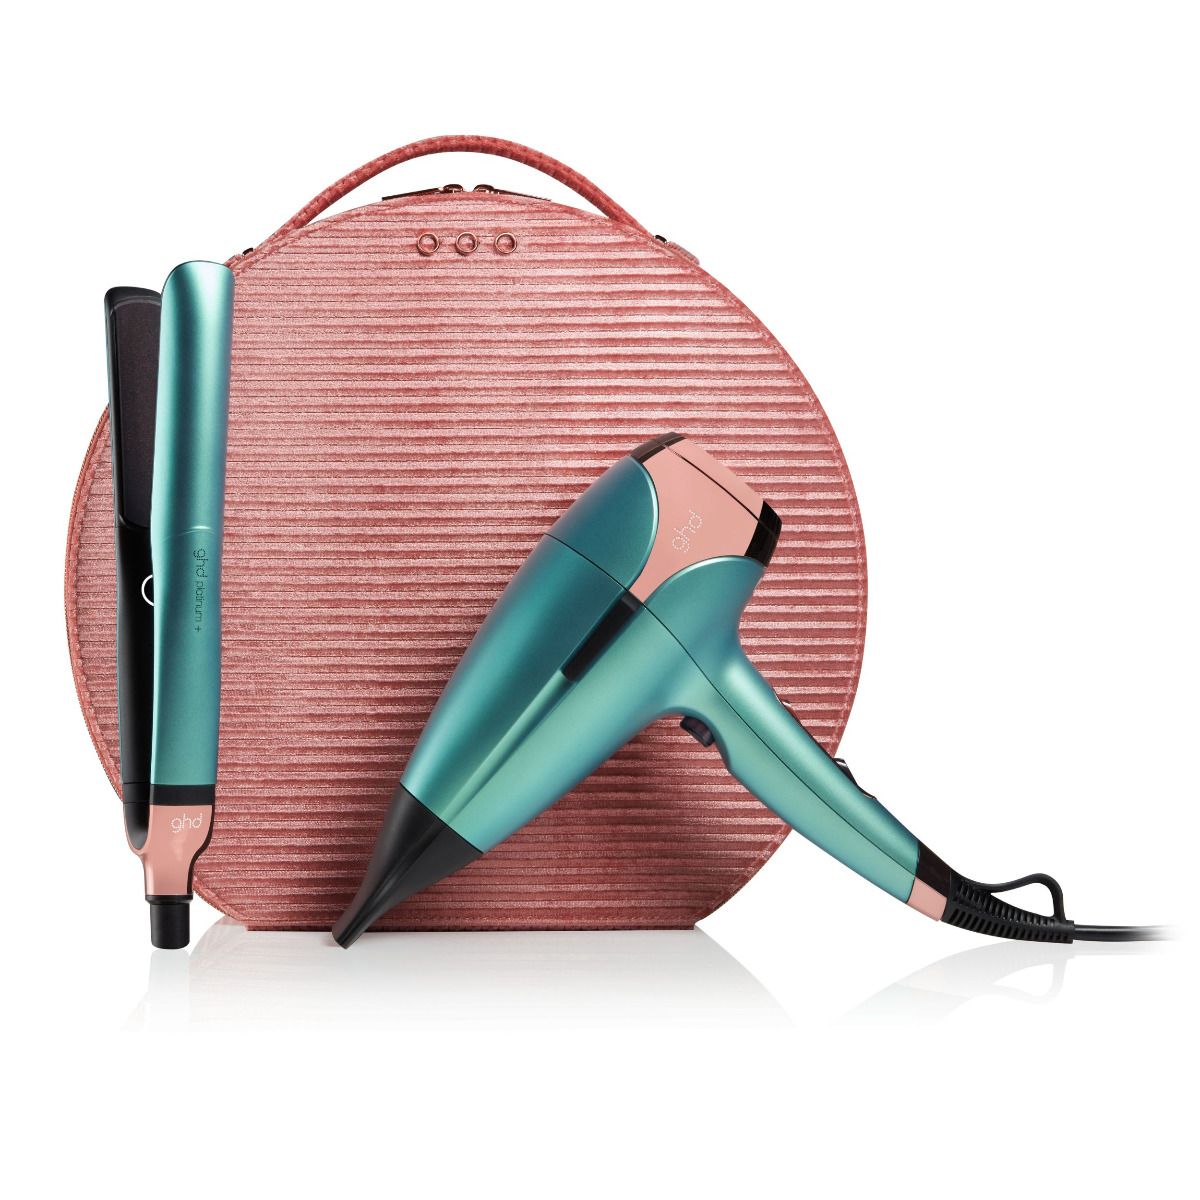 Afbeelding van ghd Dreamland Platinum+ Hair Dryer Helios Deluxe Giftset Limited Edition Turquoise